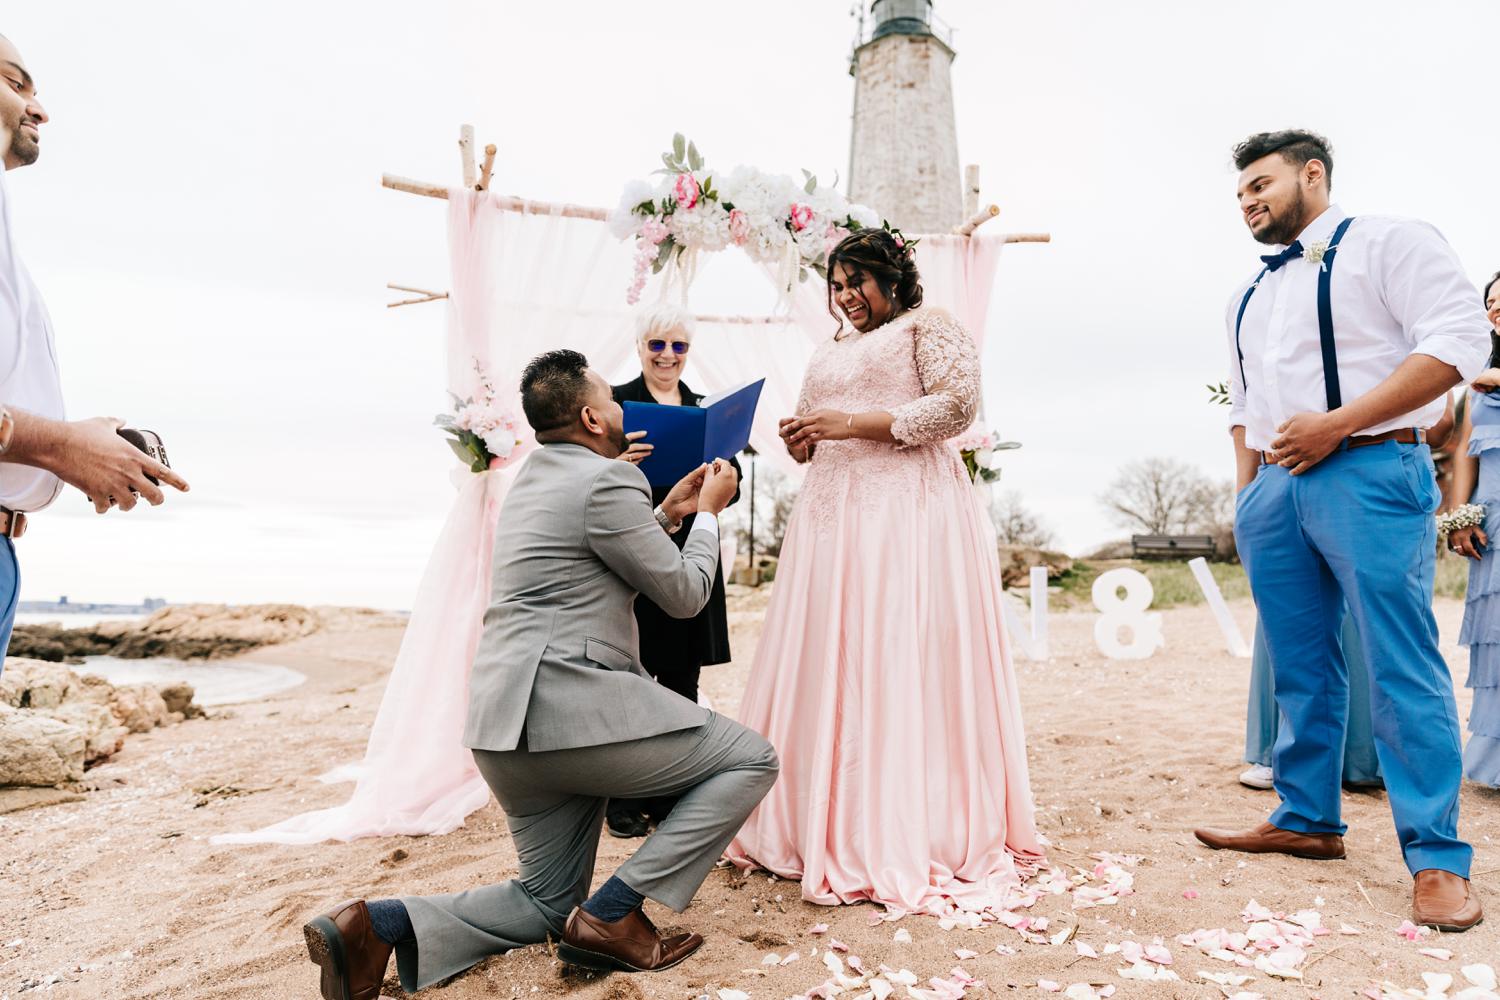 Groom exchanging rings with bride during beach wedding ceremony